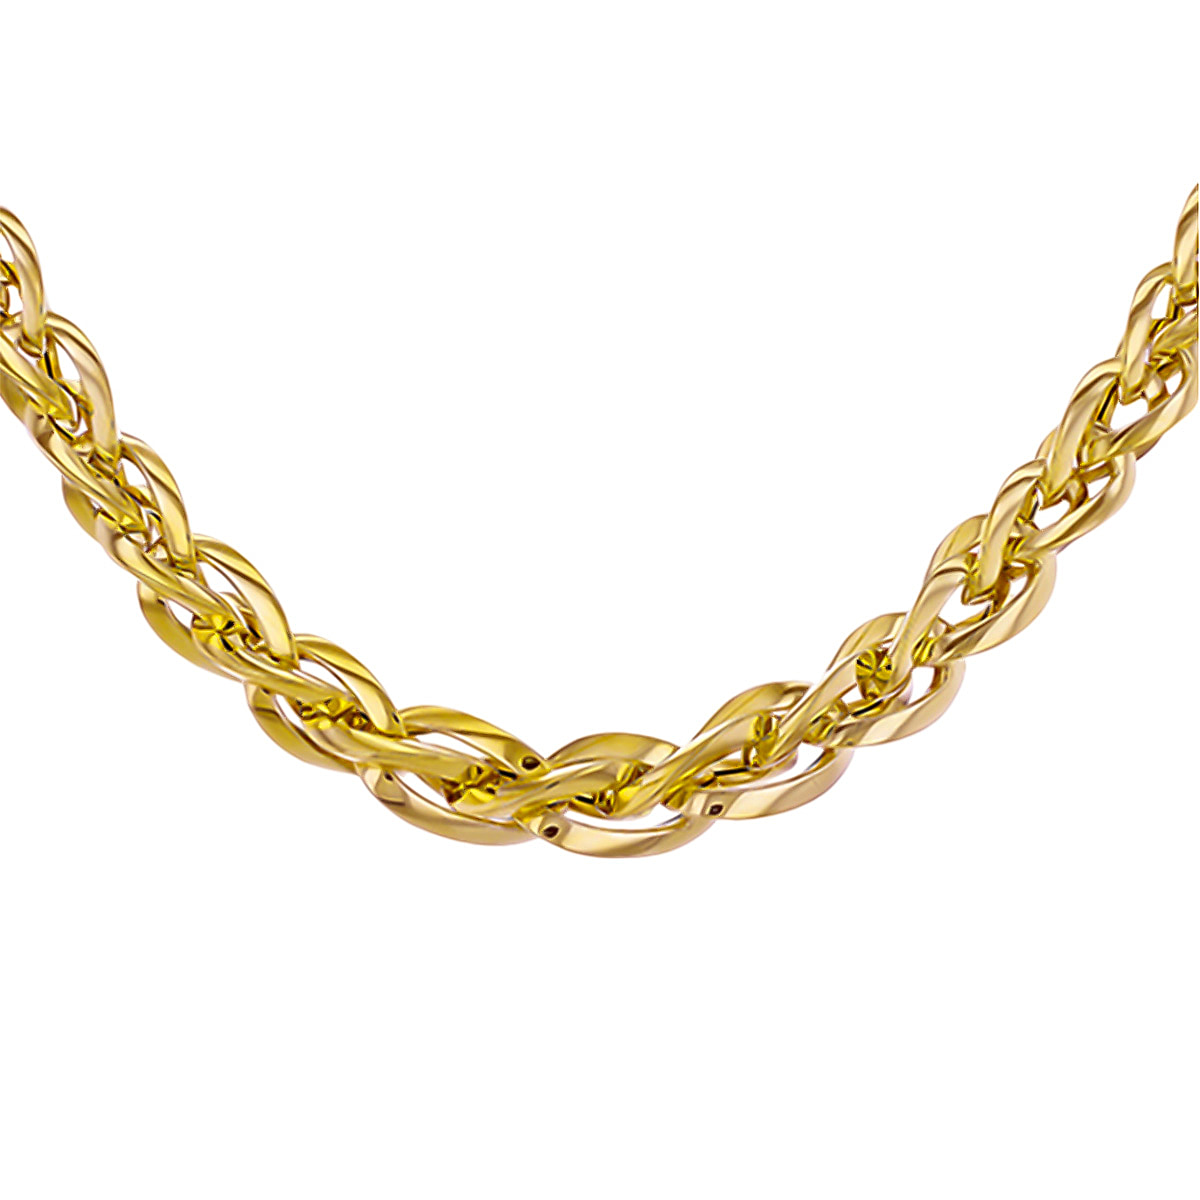 Designer Inspired Closeout - 9K Yellow Gold Woven Link Necklace (Size - 18), Gold Wt. 14.2 Gms